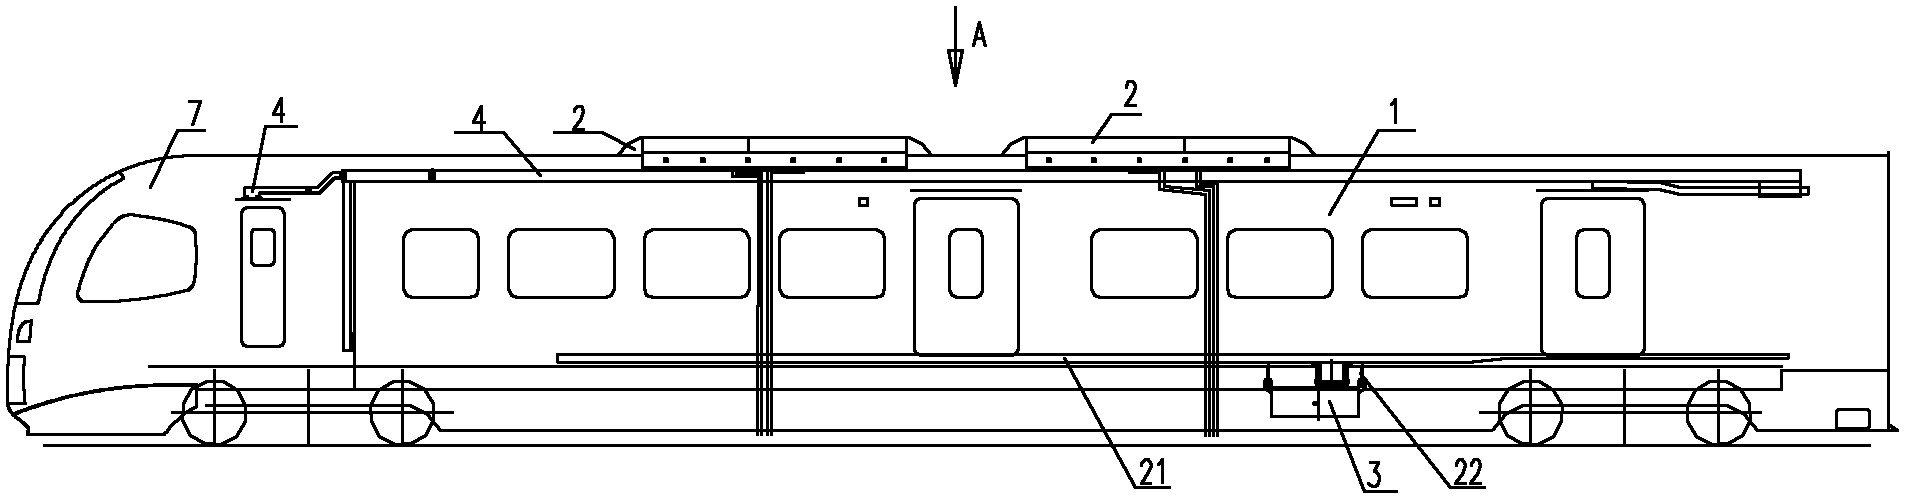 Air-conditioner air duct system used for intercity motor train unit